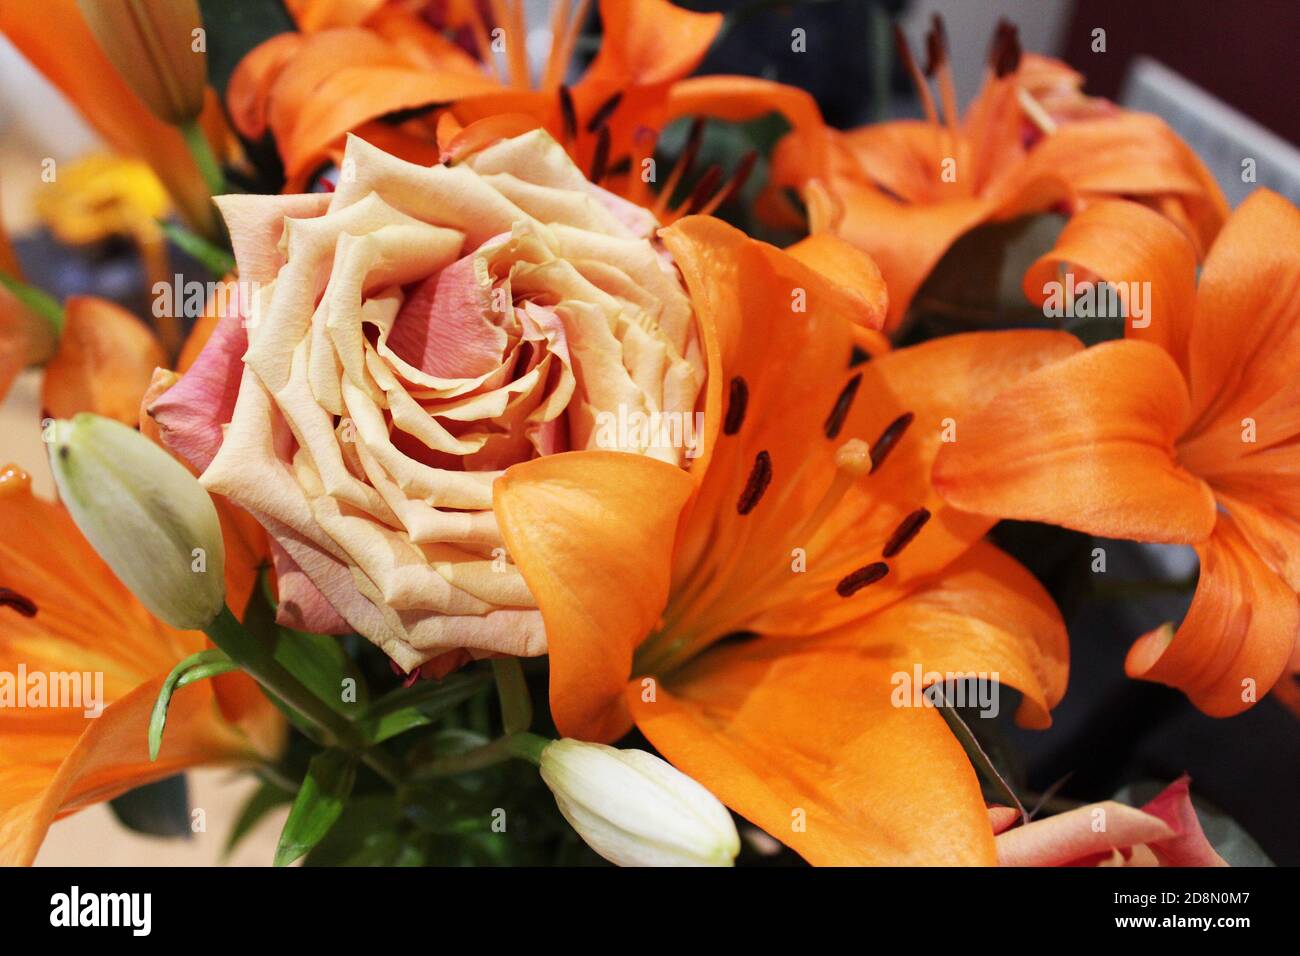 Close up orange rose (Rosa) in a bunch/bouquet of Orange County king lilies (Lilium), orange flowers Stock Photo